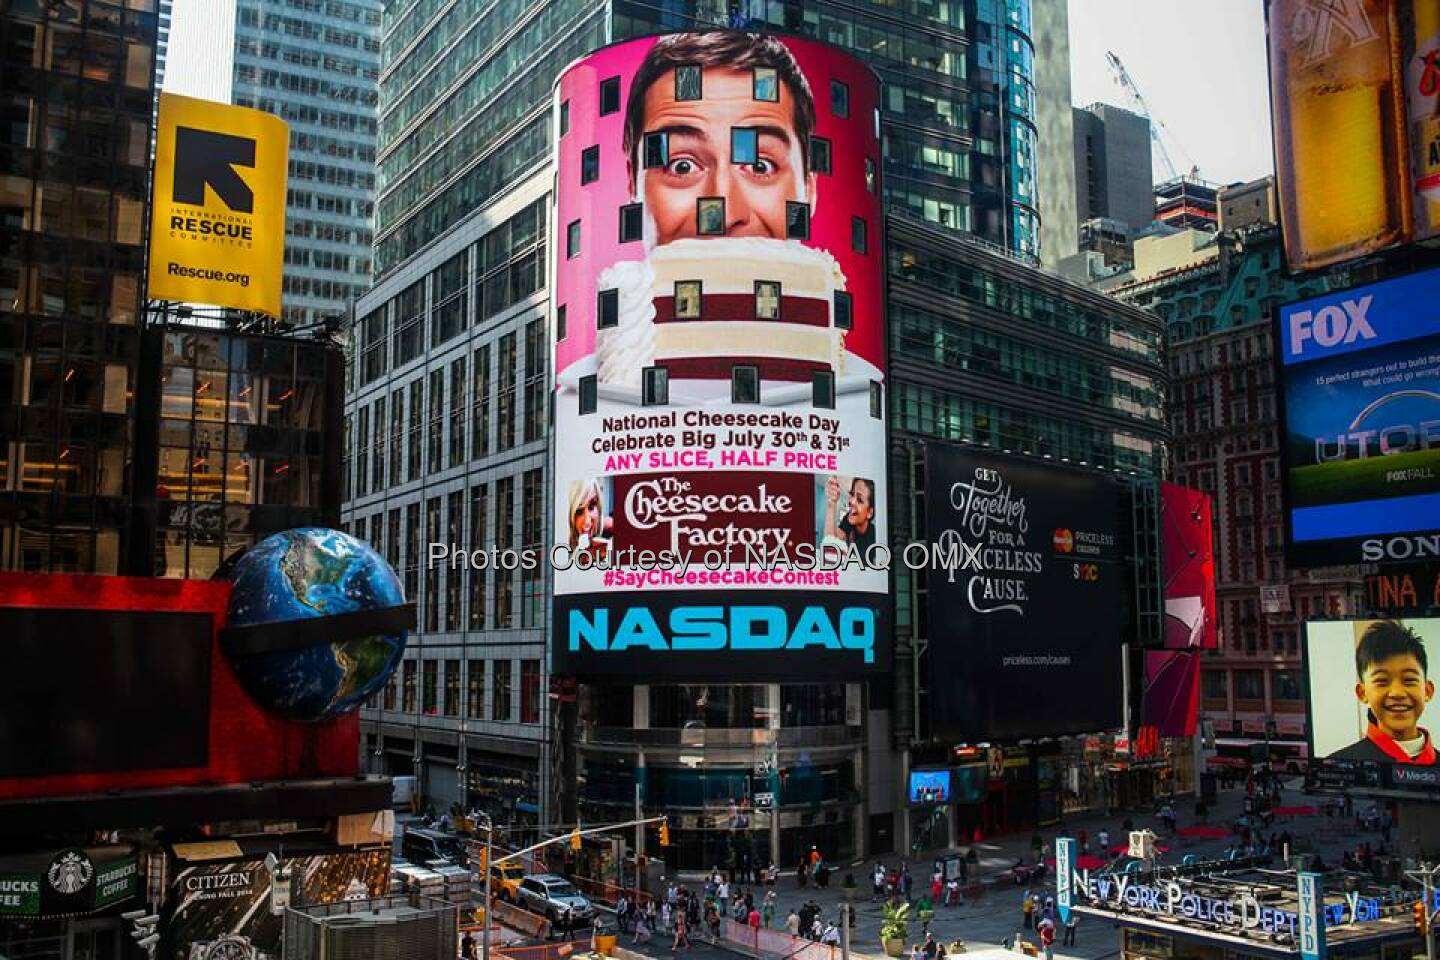 Can't wait to see your @Cheesecake selfies! Register now: http://bit.ly/1AzyRGq #SayCheesecakeContest  Source: http://facebook.com/NASDAQ